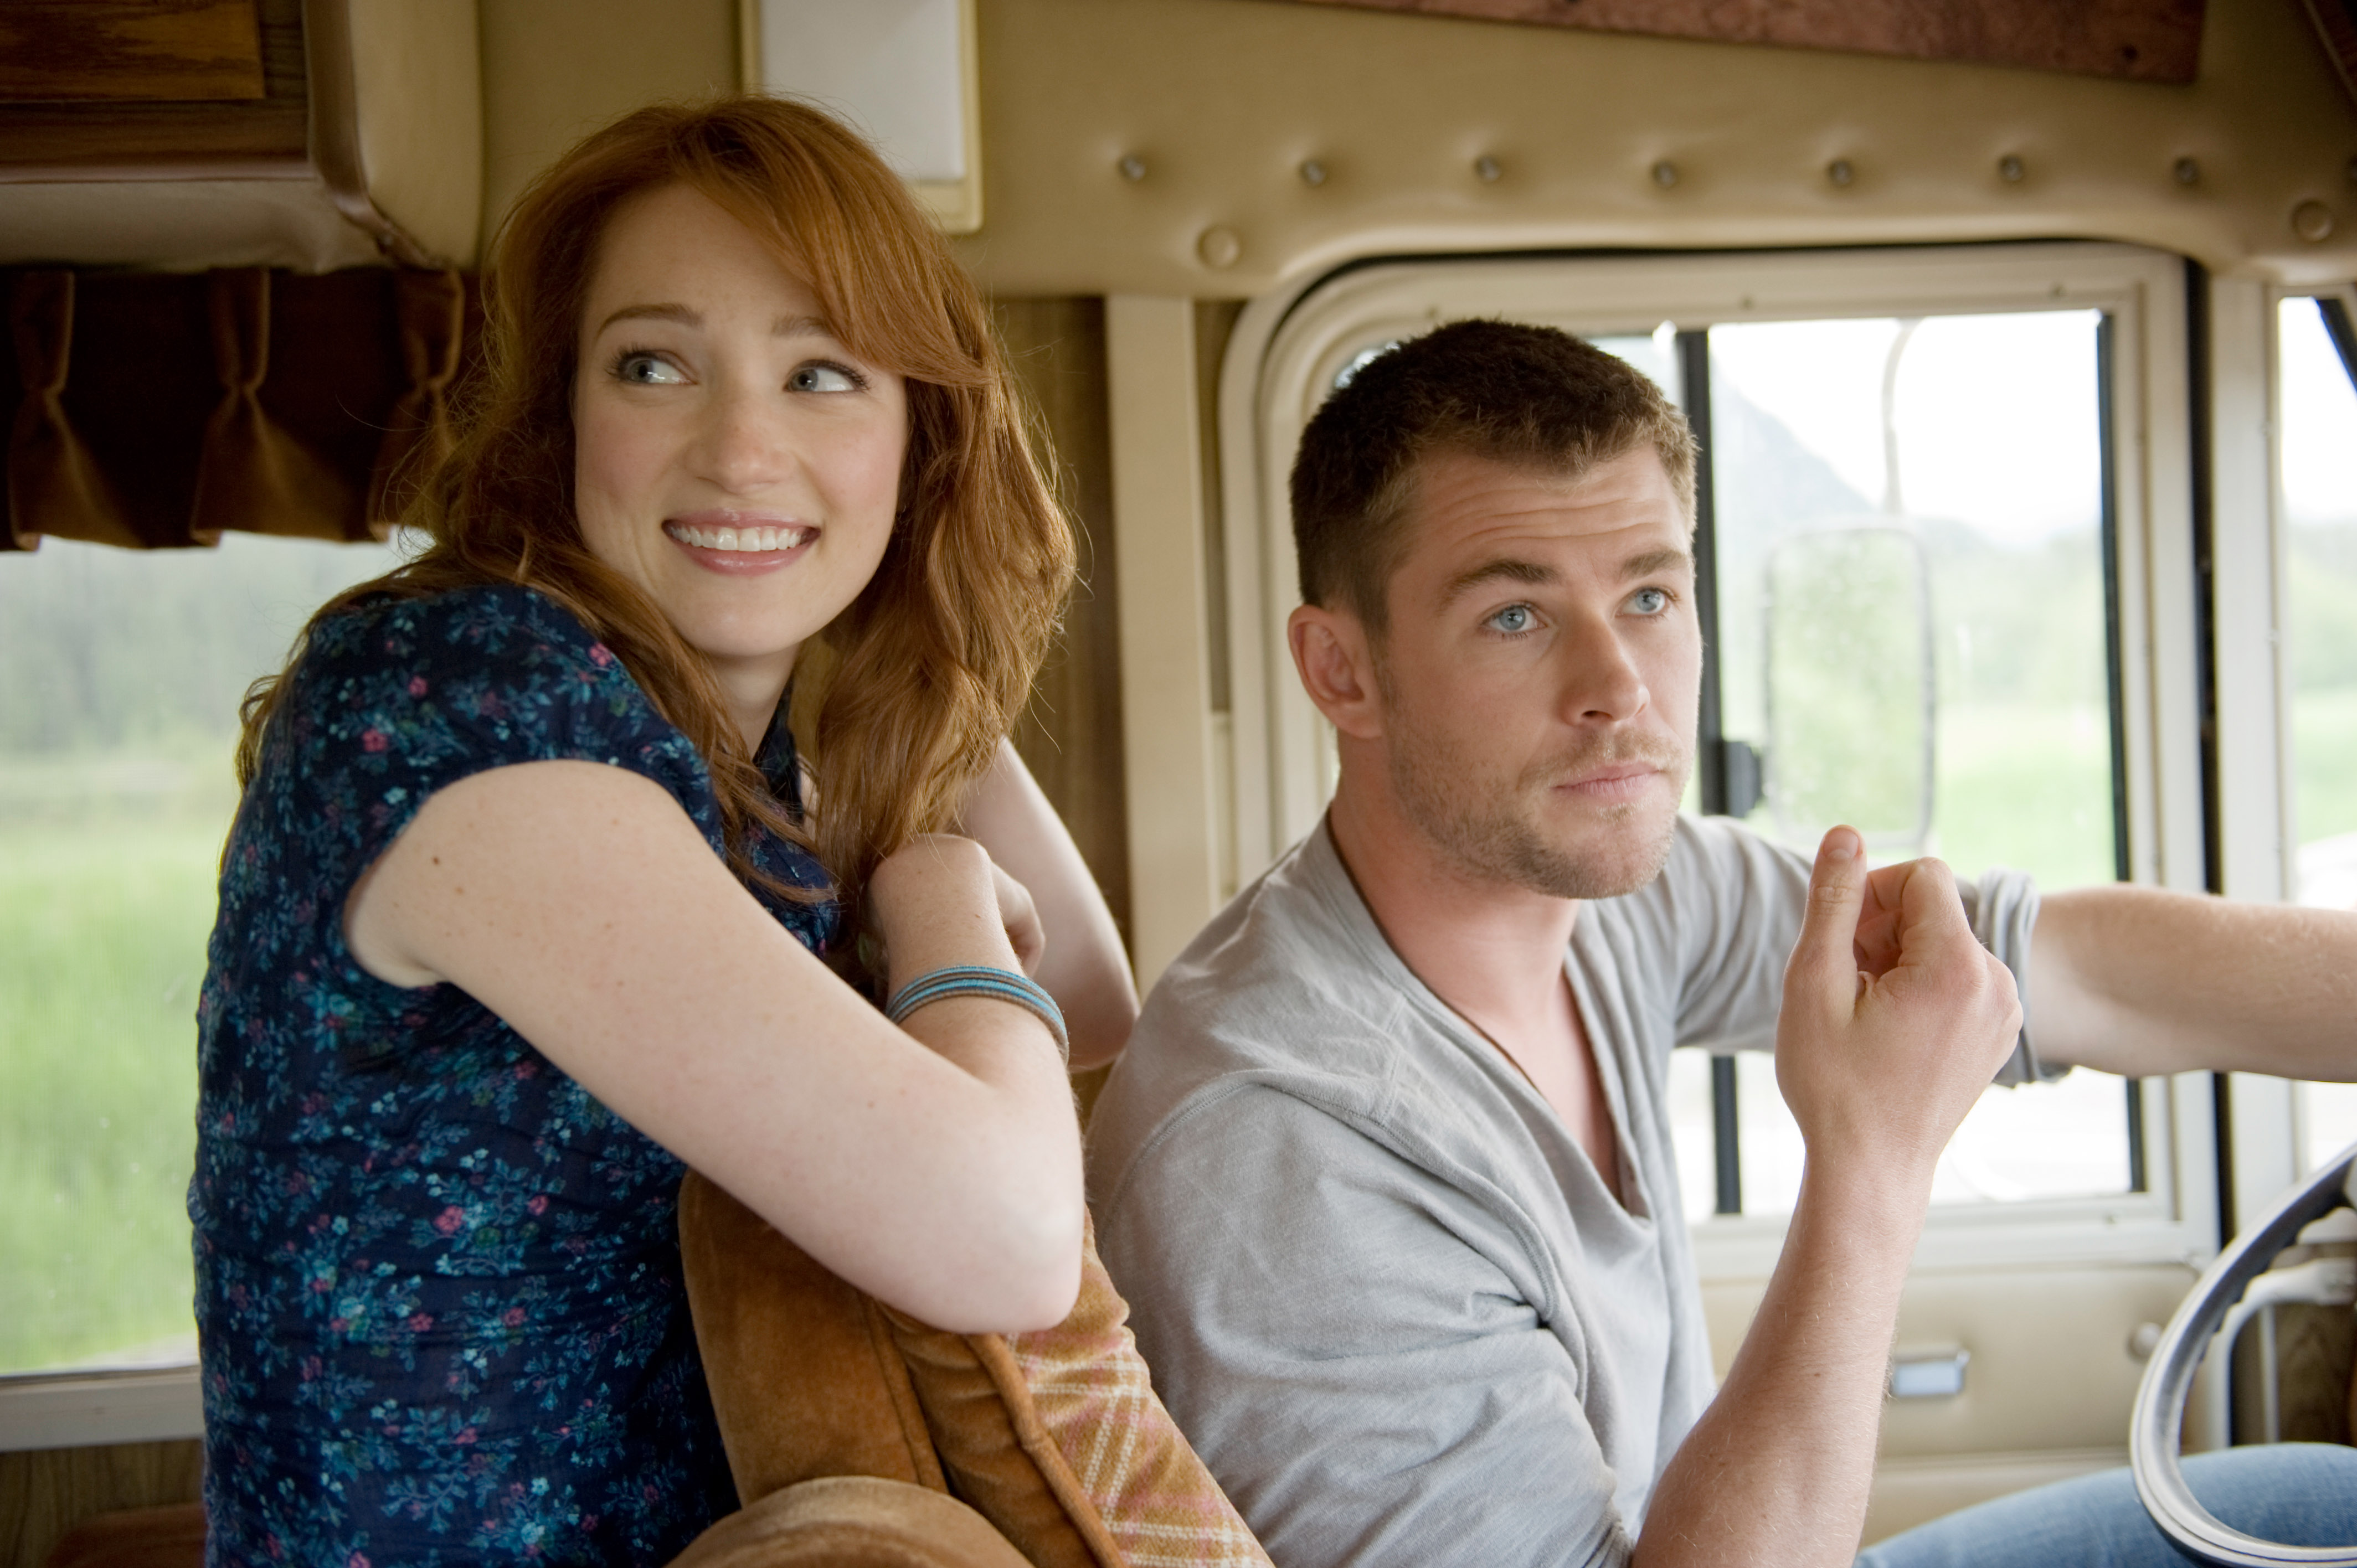 THE CABIN IN THE WOODS, from left: Kristen Connolly, Chris Hemsworth, 2012, ph: Diyah Pera / © Lionsgate /Courtesy Everett Collection